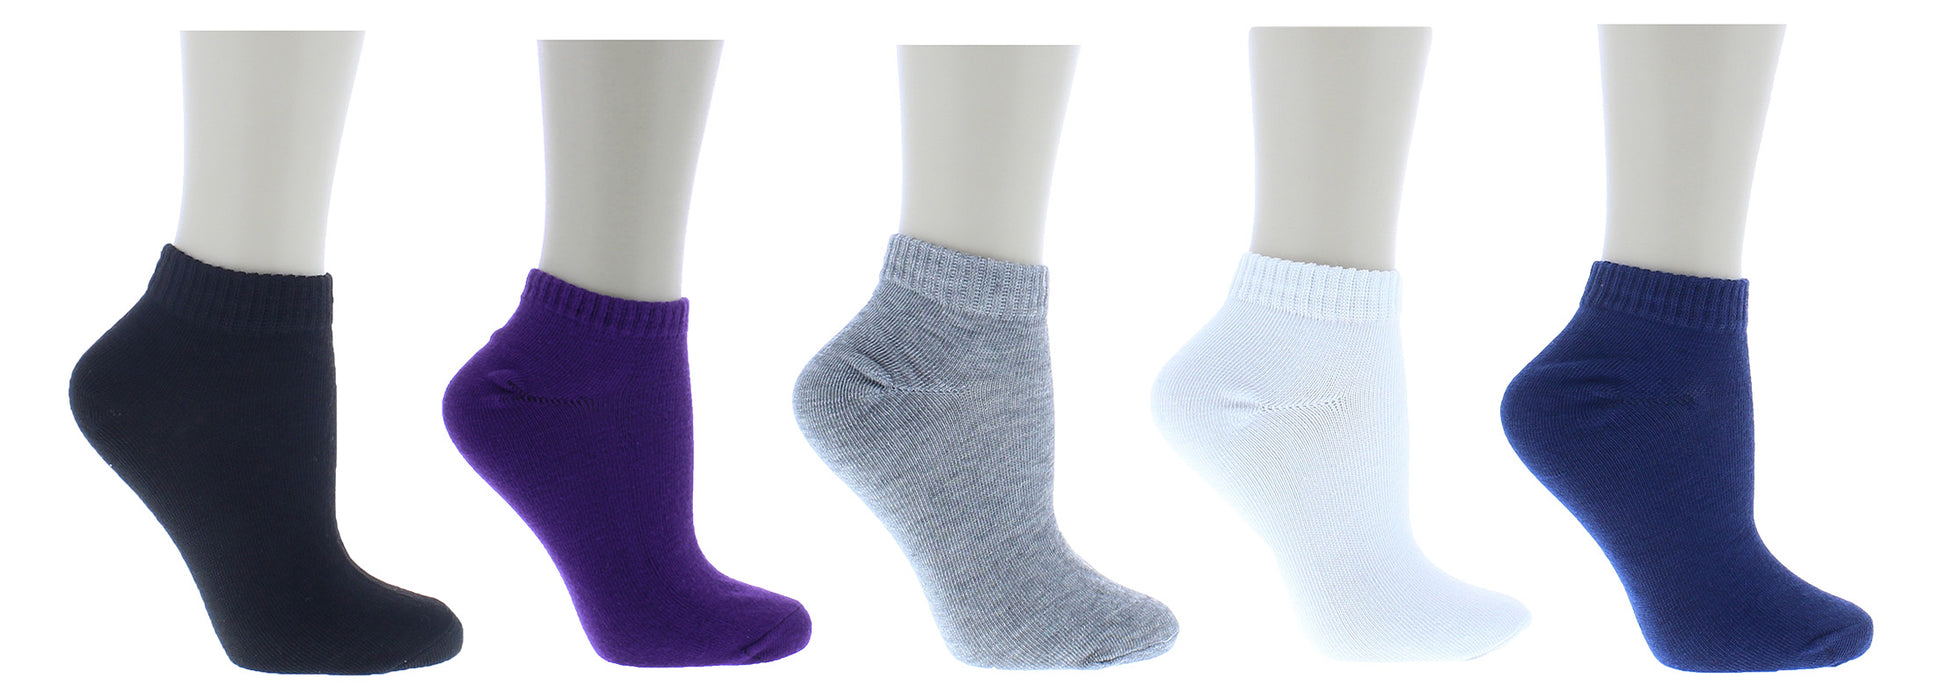 Low Cut Sock in Solid Colors